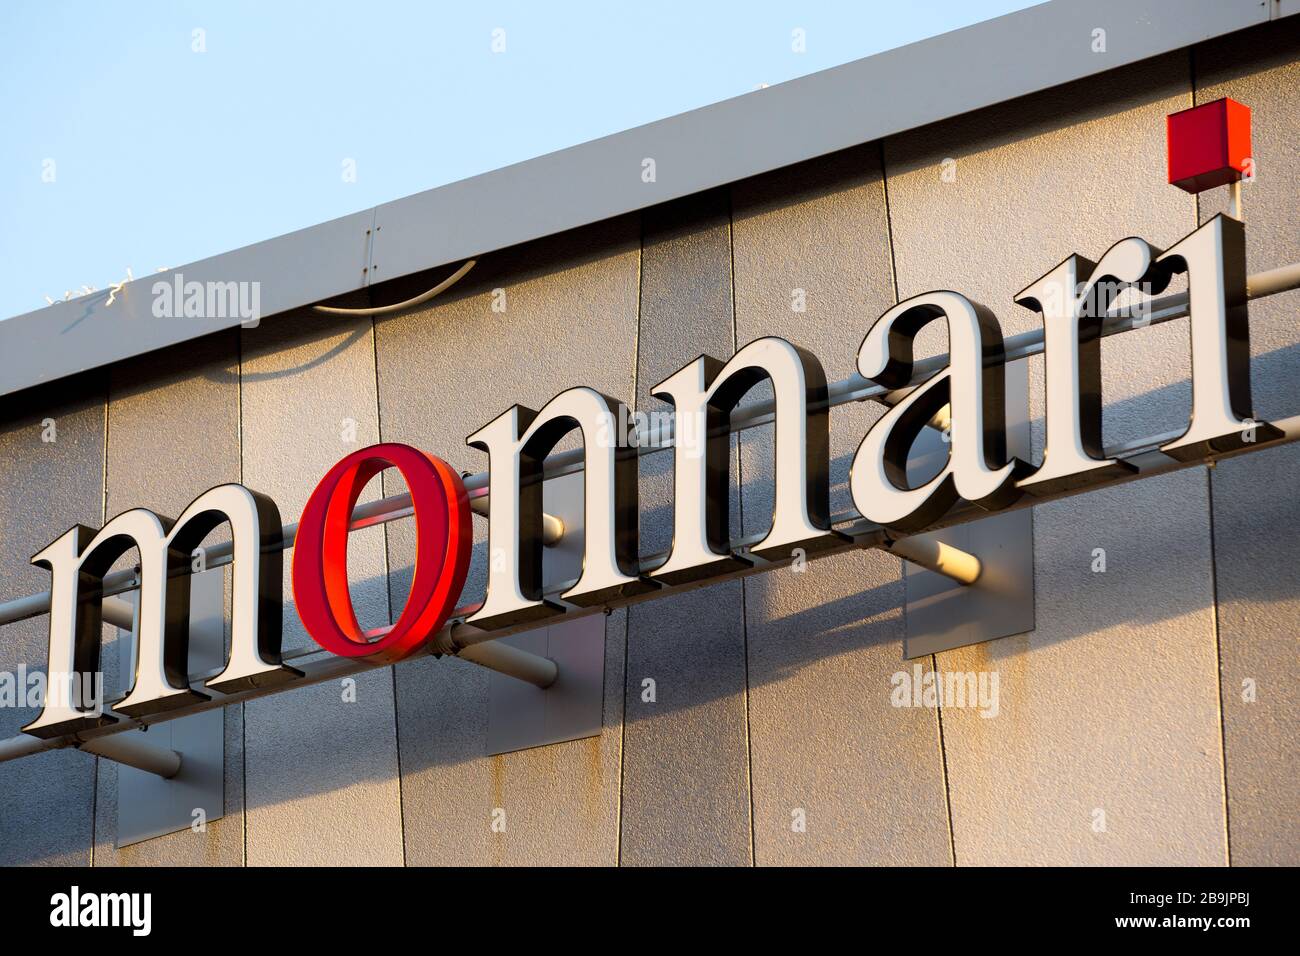 Polish company dealing mainly in the design and sale of women's clothing,  Monnari Trade logo seen at one of their stores in Zgorzelec Stock Photo -  Alamy